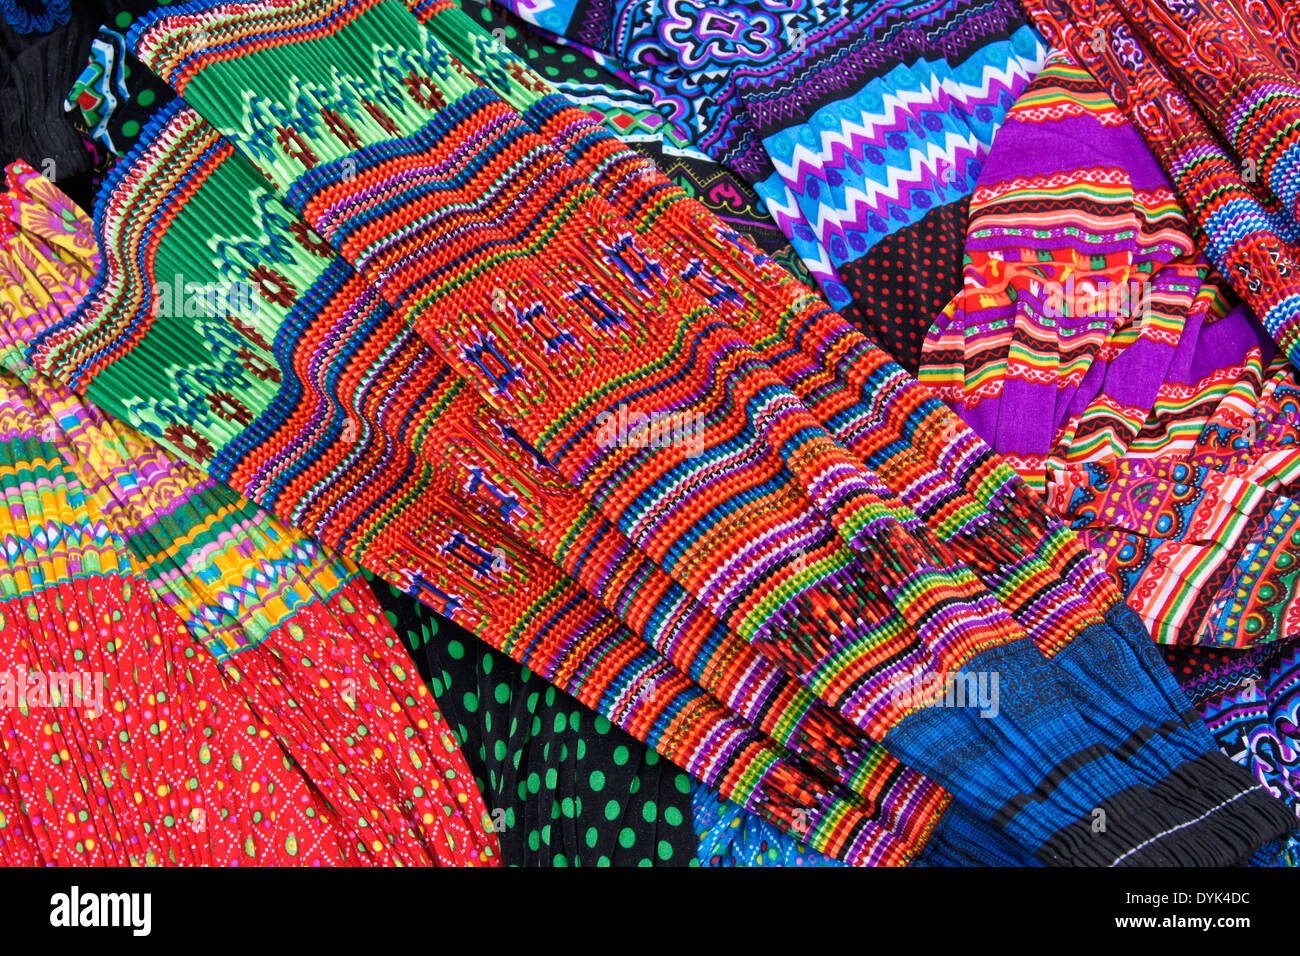 Flower Hmong pleated skirts for sale in market, Sapa (Sa Pa), North Vietnam Stock Photo